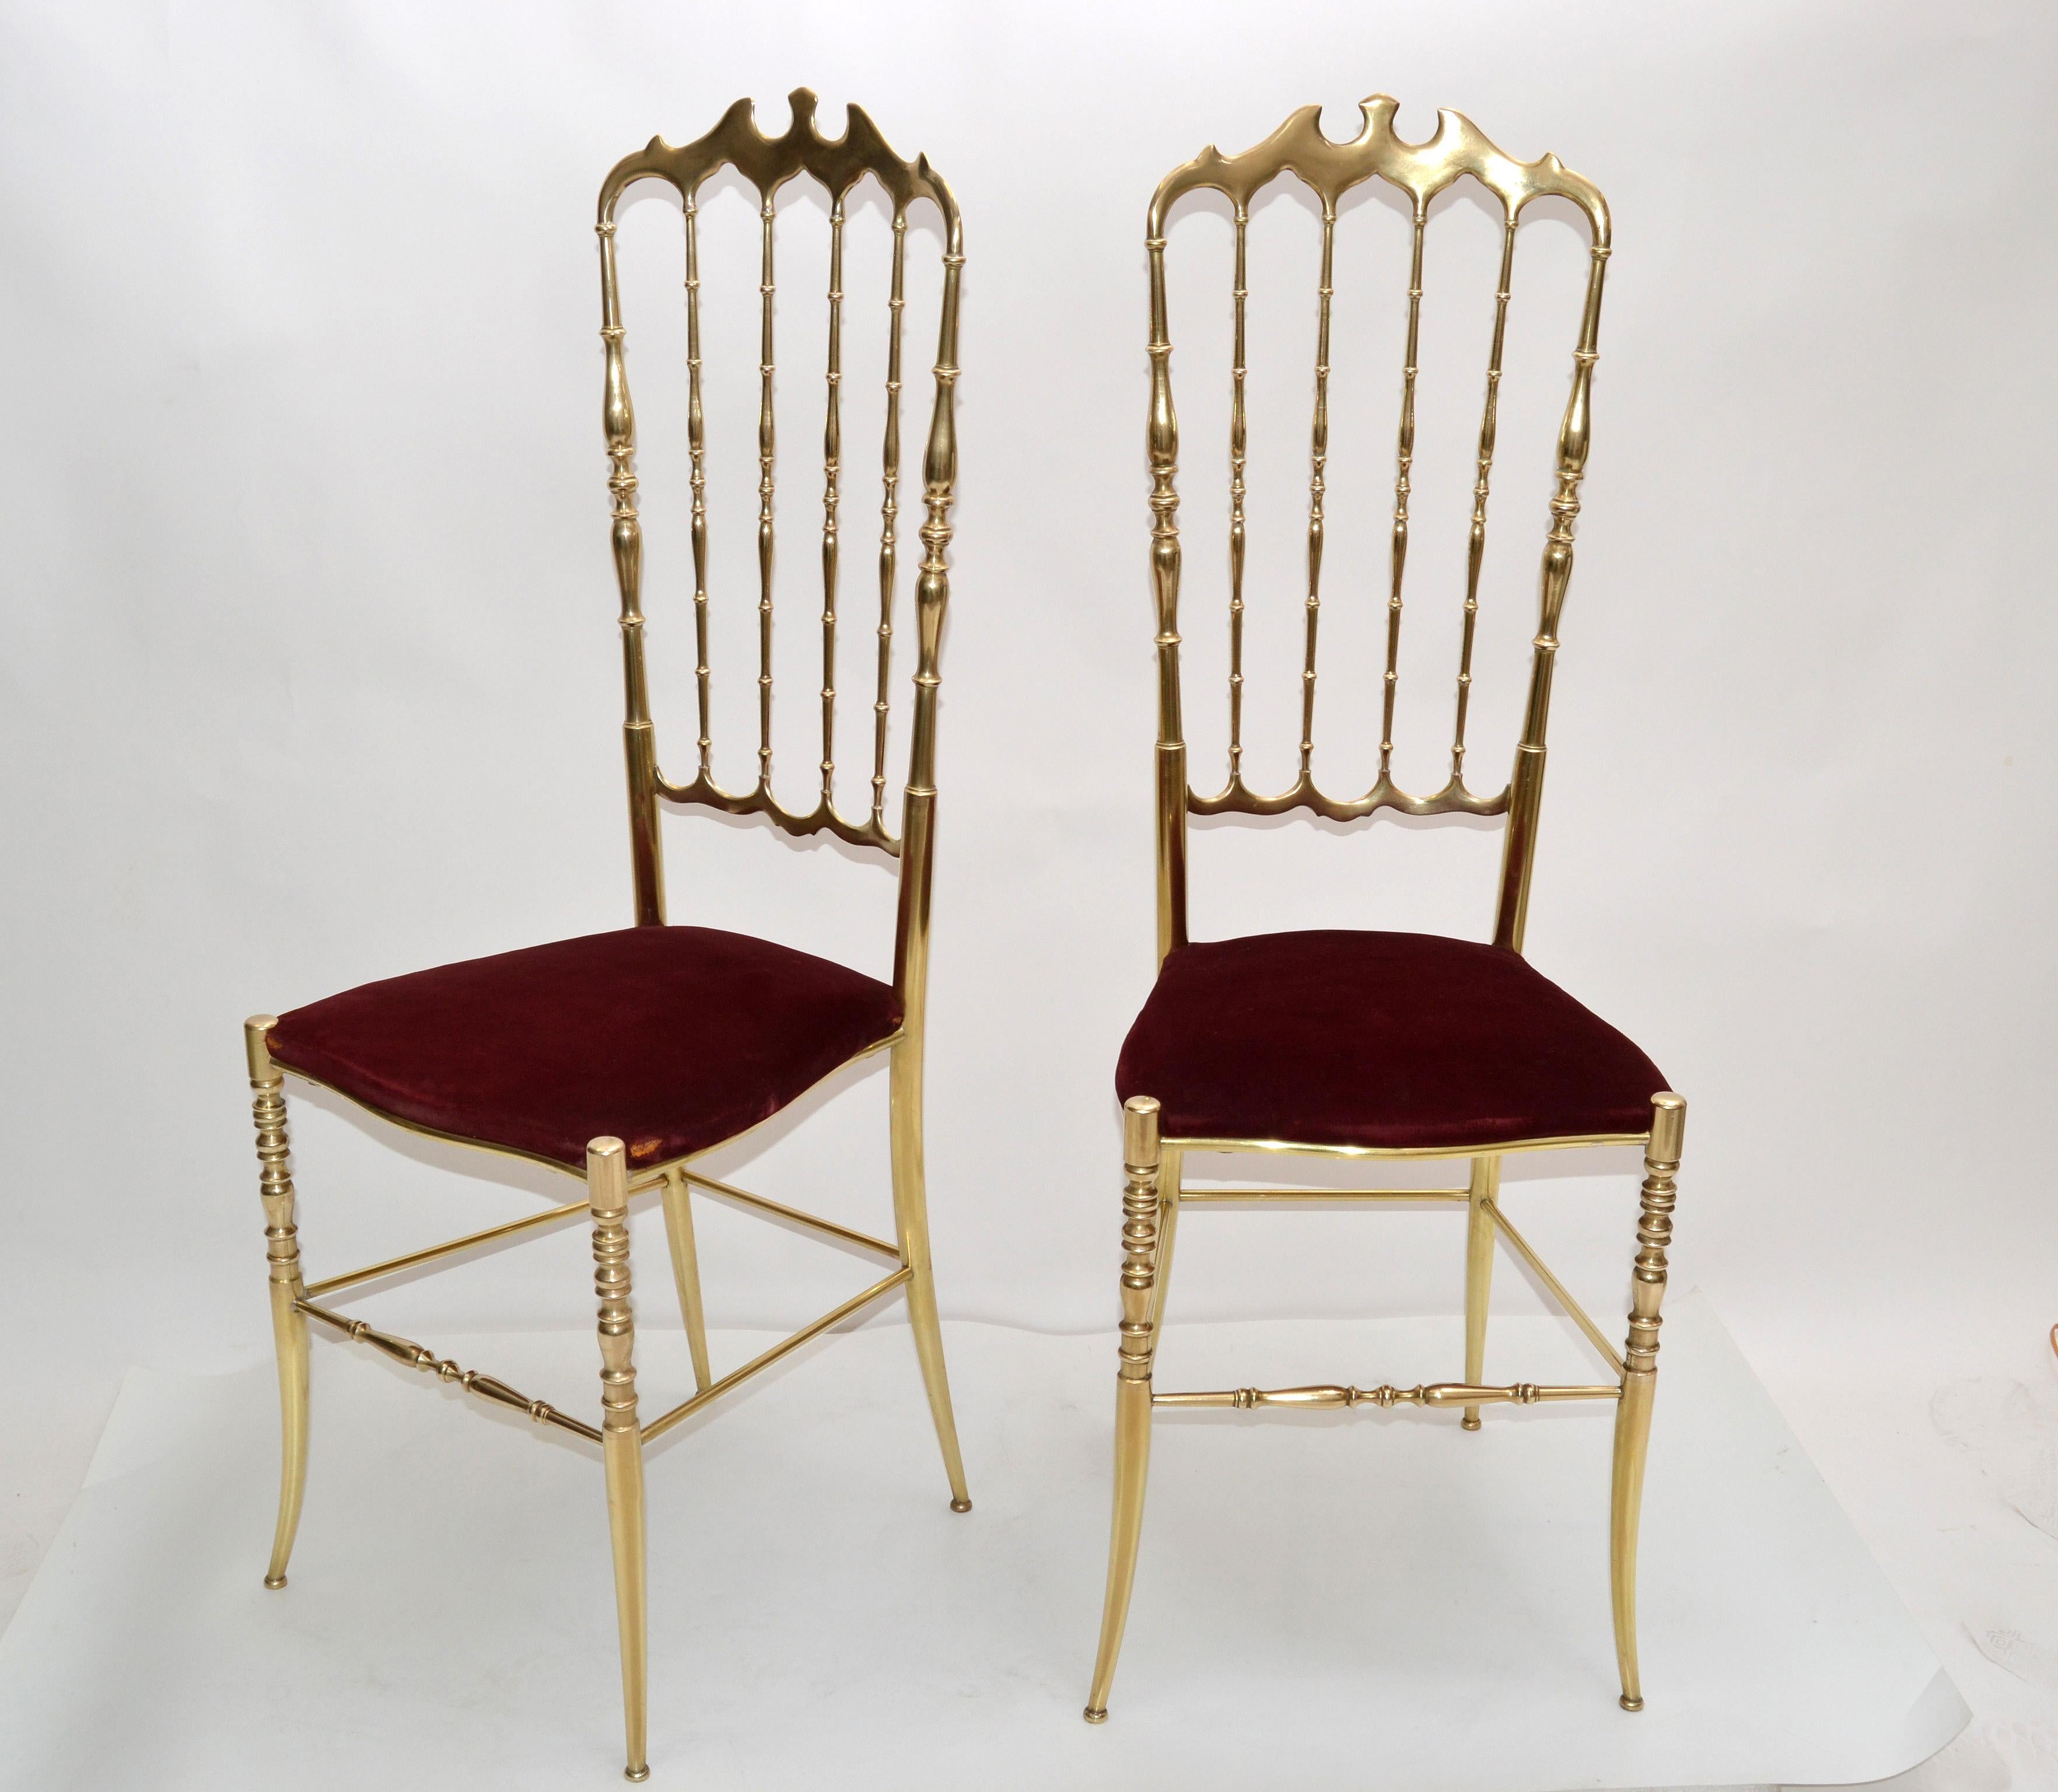 Pair of Mid-Century Modern high back bronze Chiavari chairs made in Italy, circa 1950. 
The pair retains the original red Velvet seat. 
Similar chairs are at the Le Crystal Room Restaurant of Maison Baccarat, Place des Etats Unis in Paris which